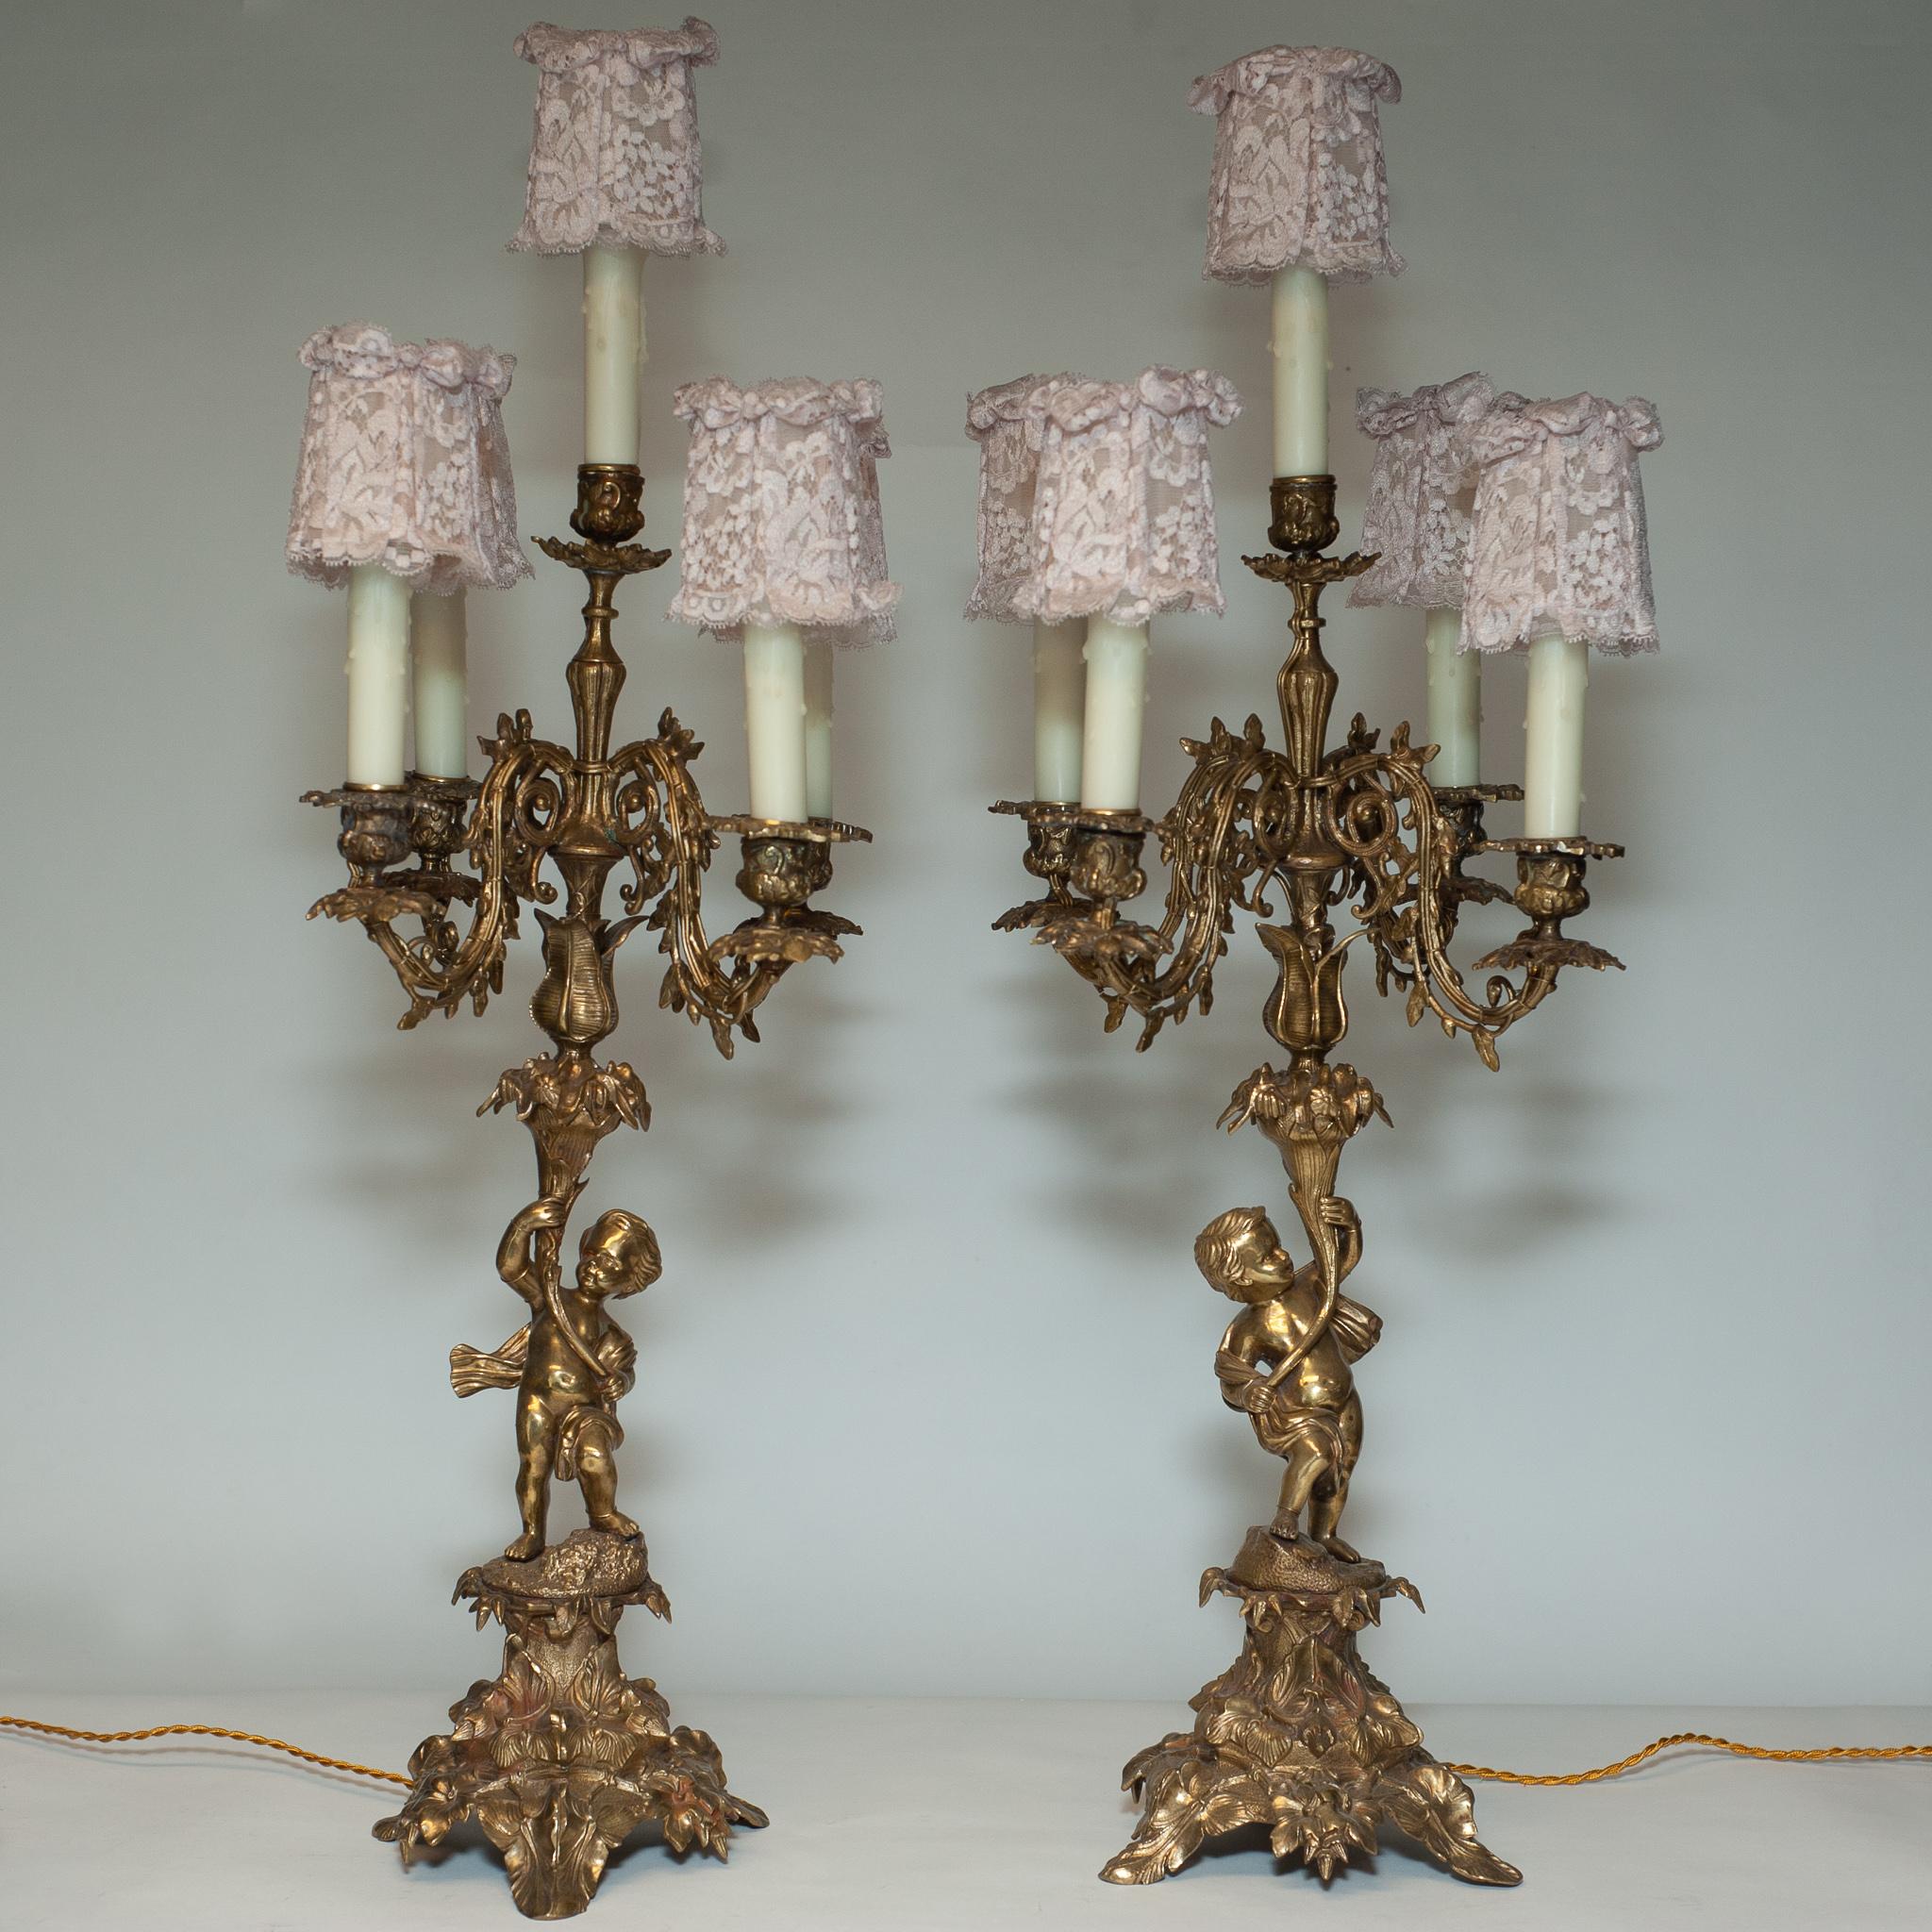 A beautiful and grand pair of French antique bronze 5 candle lamps, with handmade pink silk shades. Newly rewired.